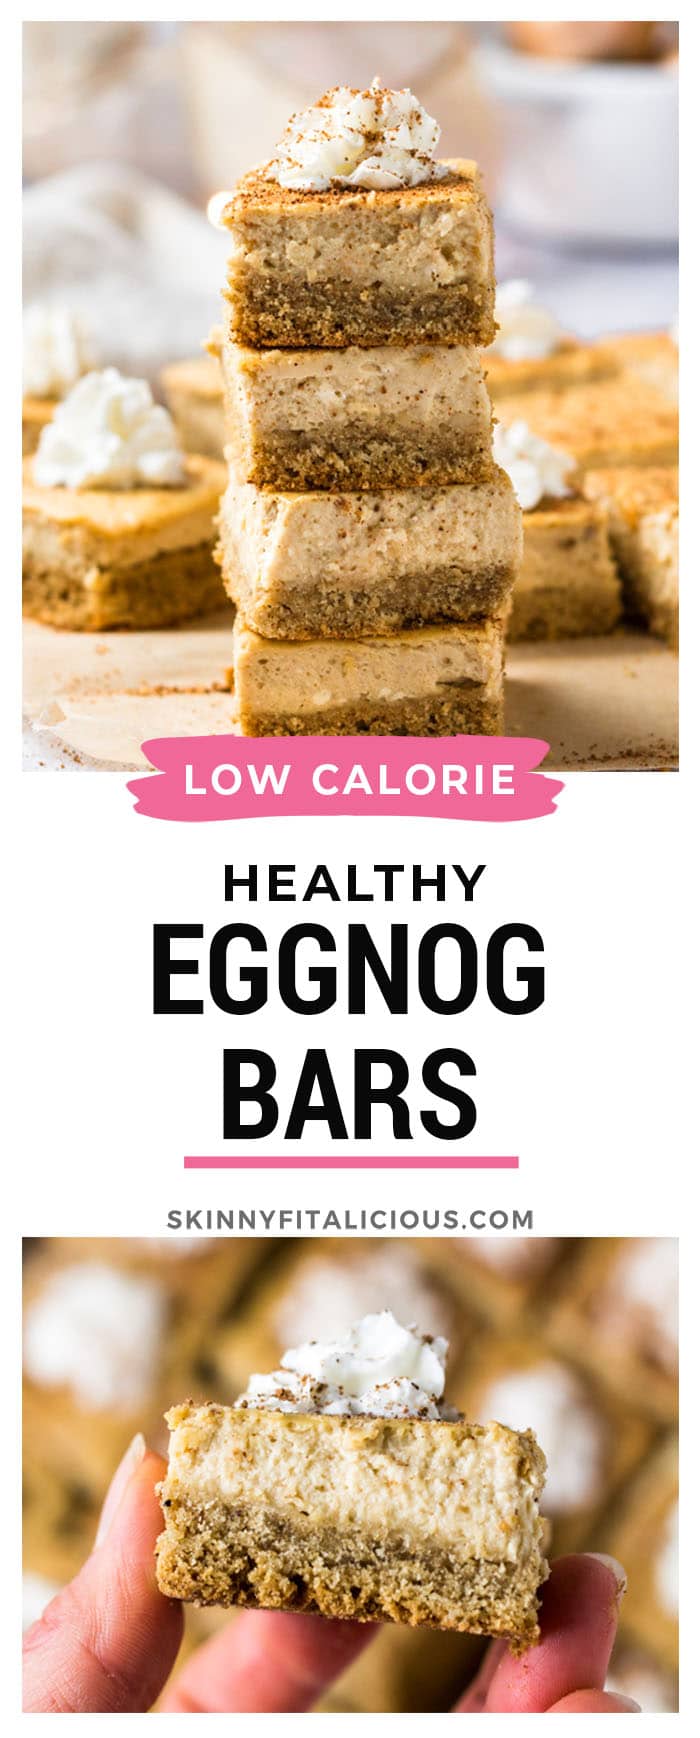 Healthy Eggnog Cheesecake Bars are made low calorie with gluten free and real food ingredients. A delicious and healthy holiday dessert recipe!